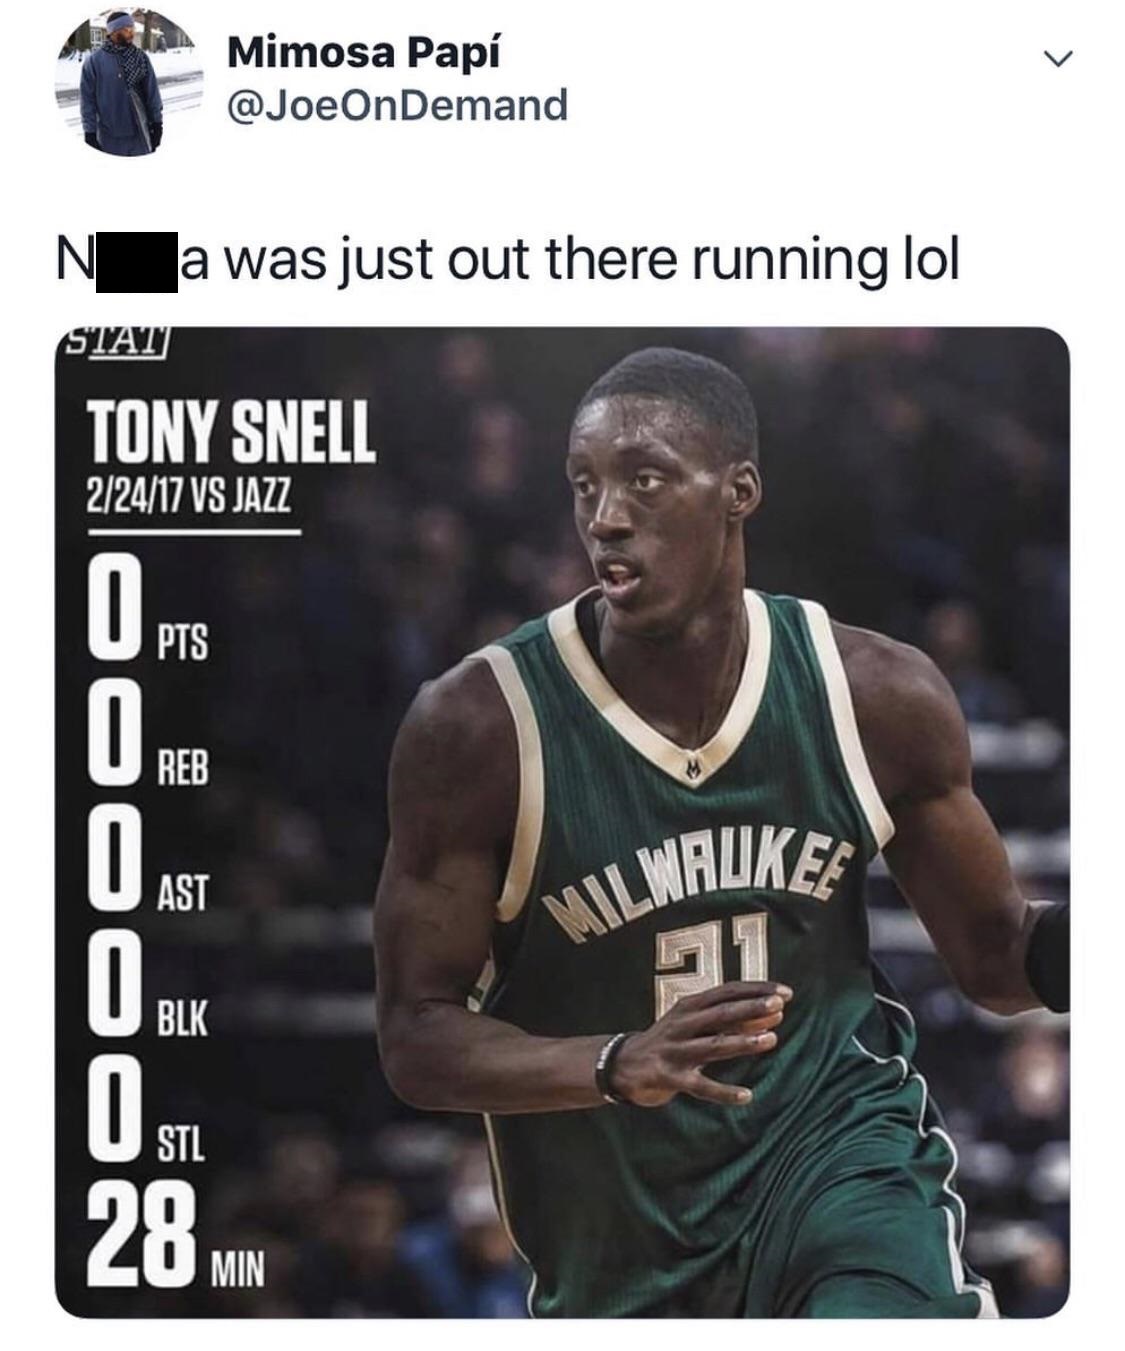 snell bucks - Mimosa Papi N***a was just out there running lol Stat Tony Snell